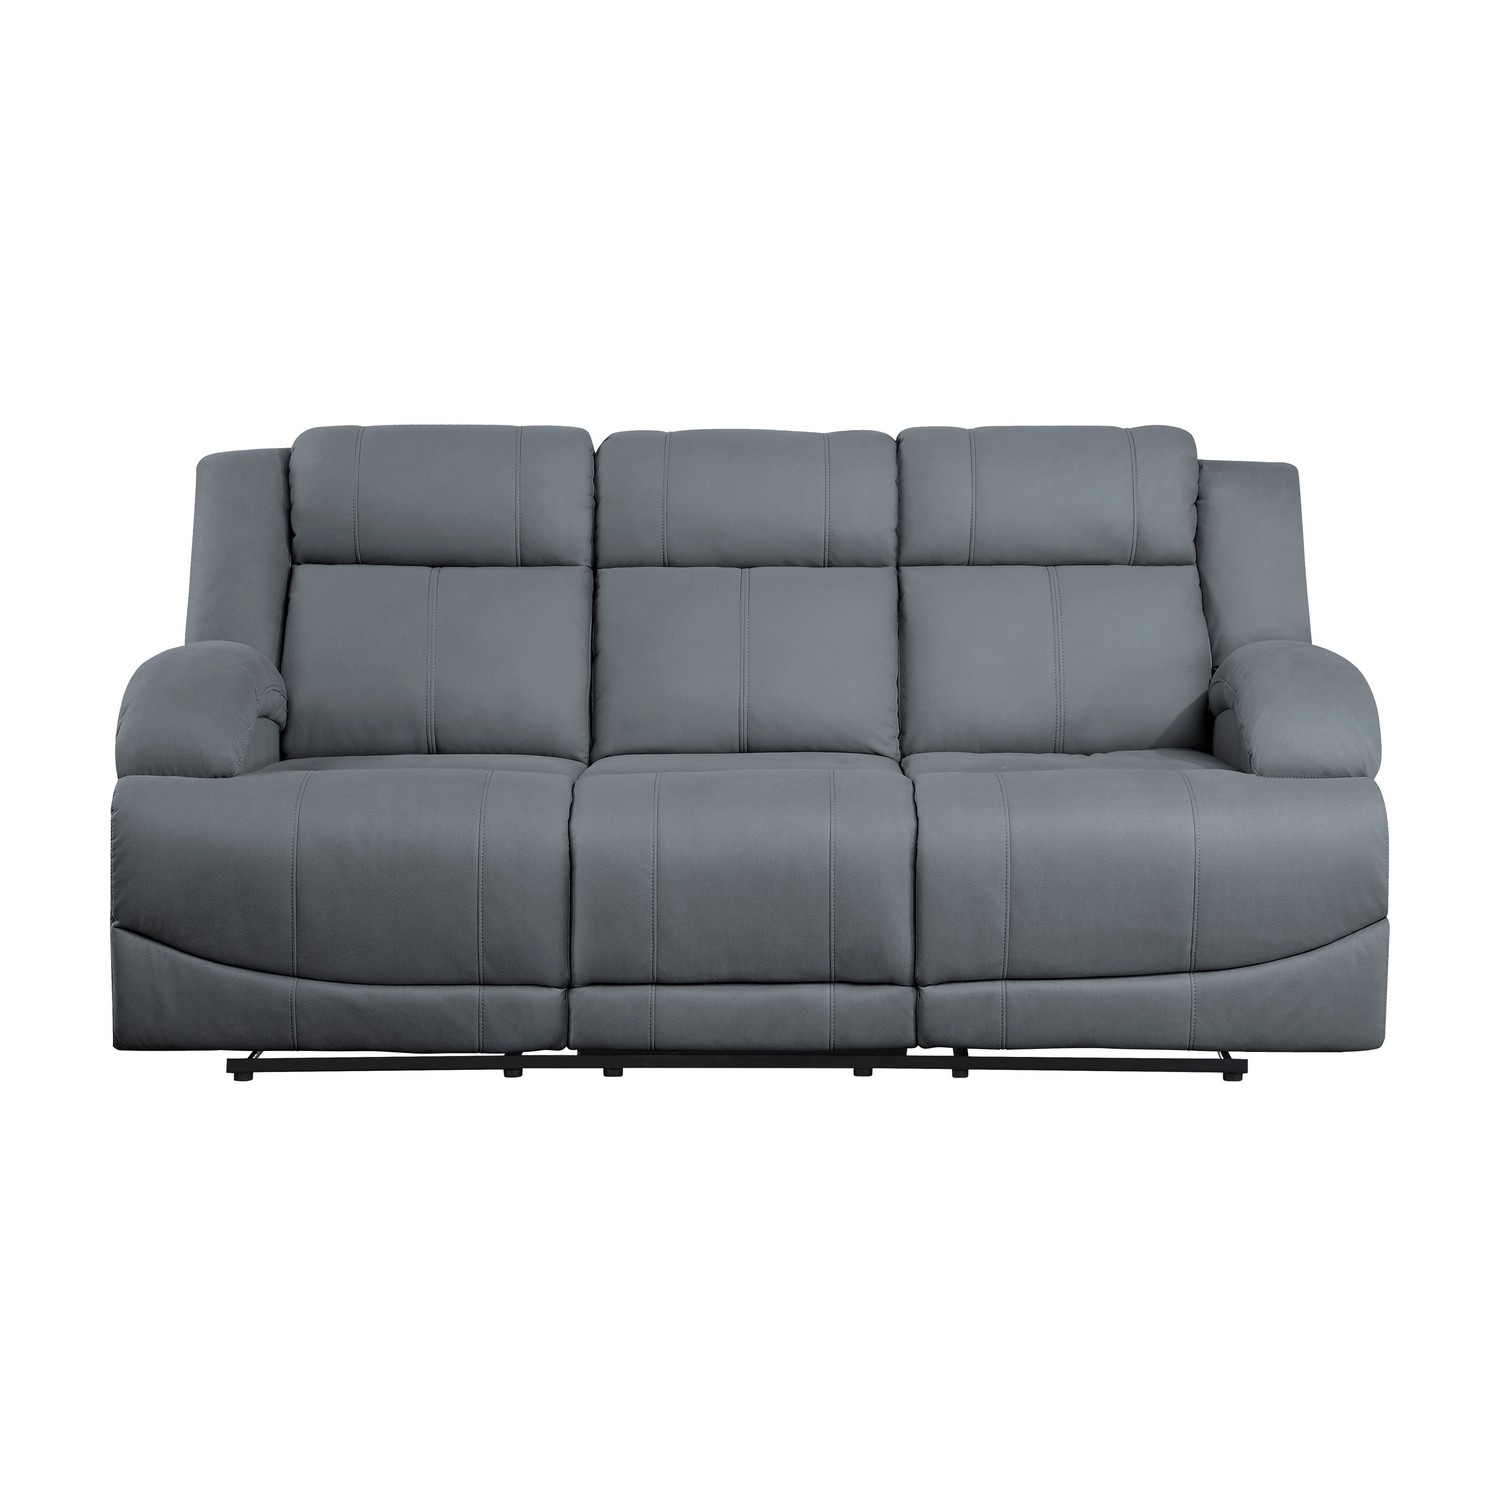 Homelegance Camryn Double Reclining Sofa - Graphite blue